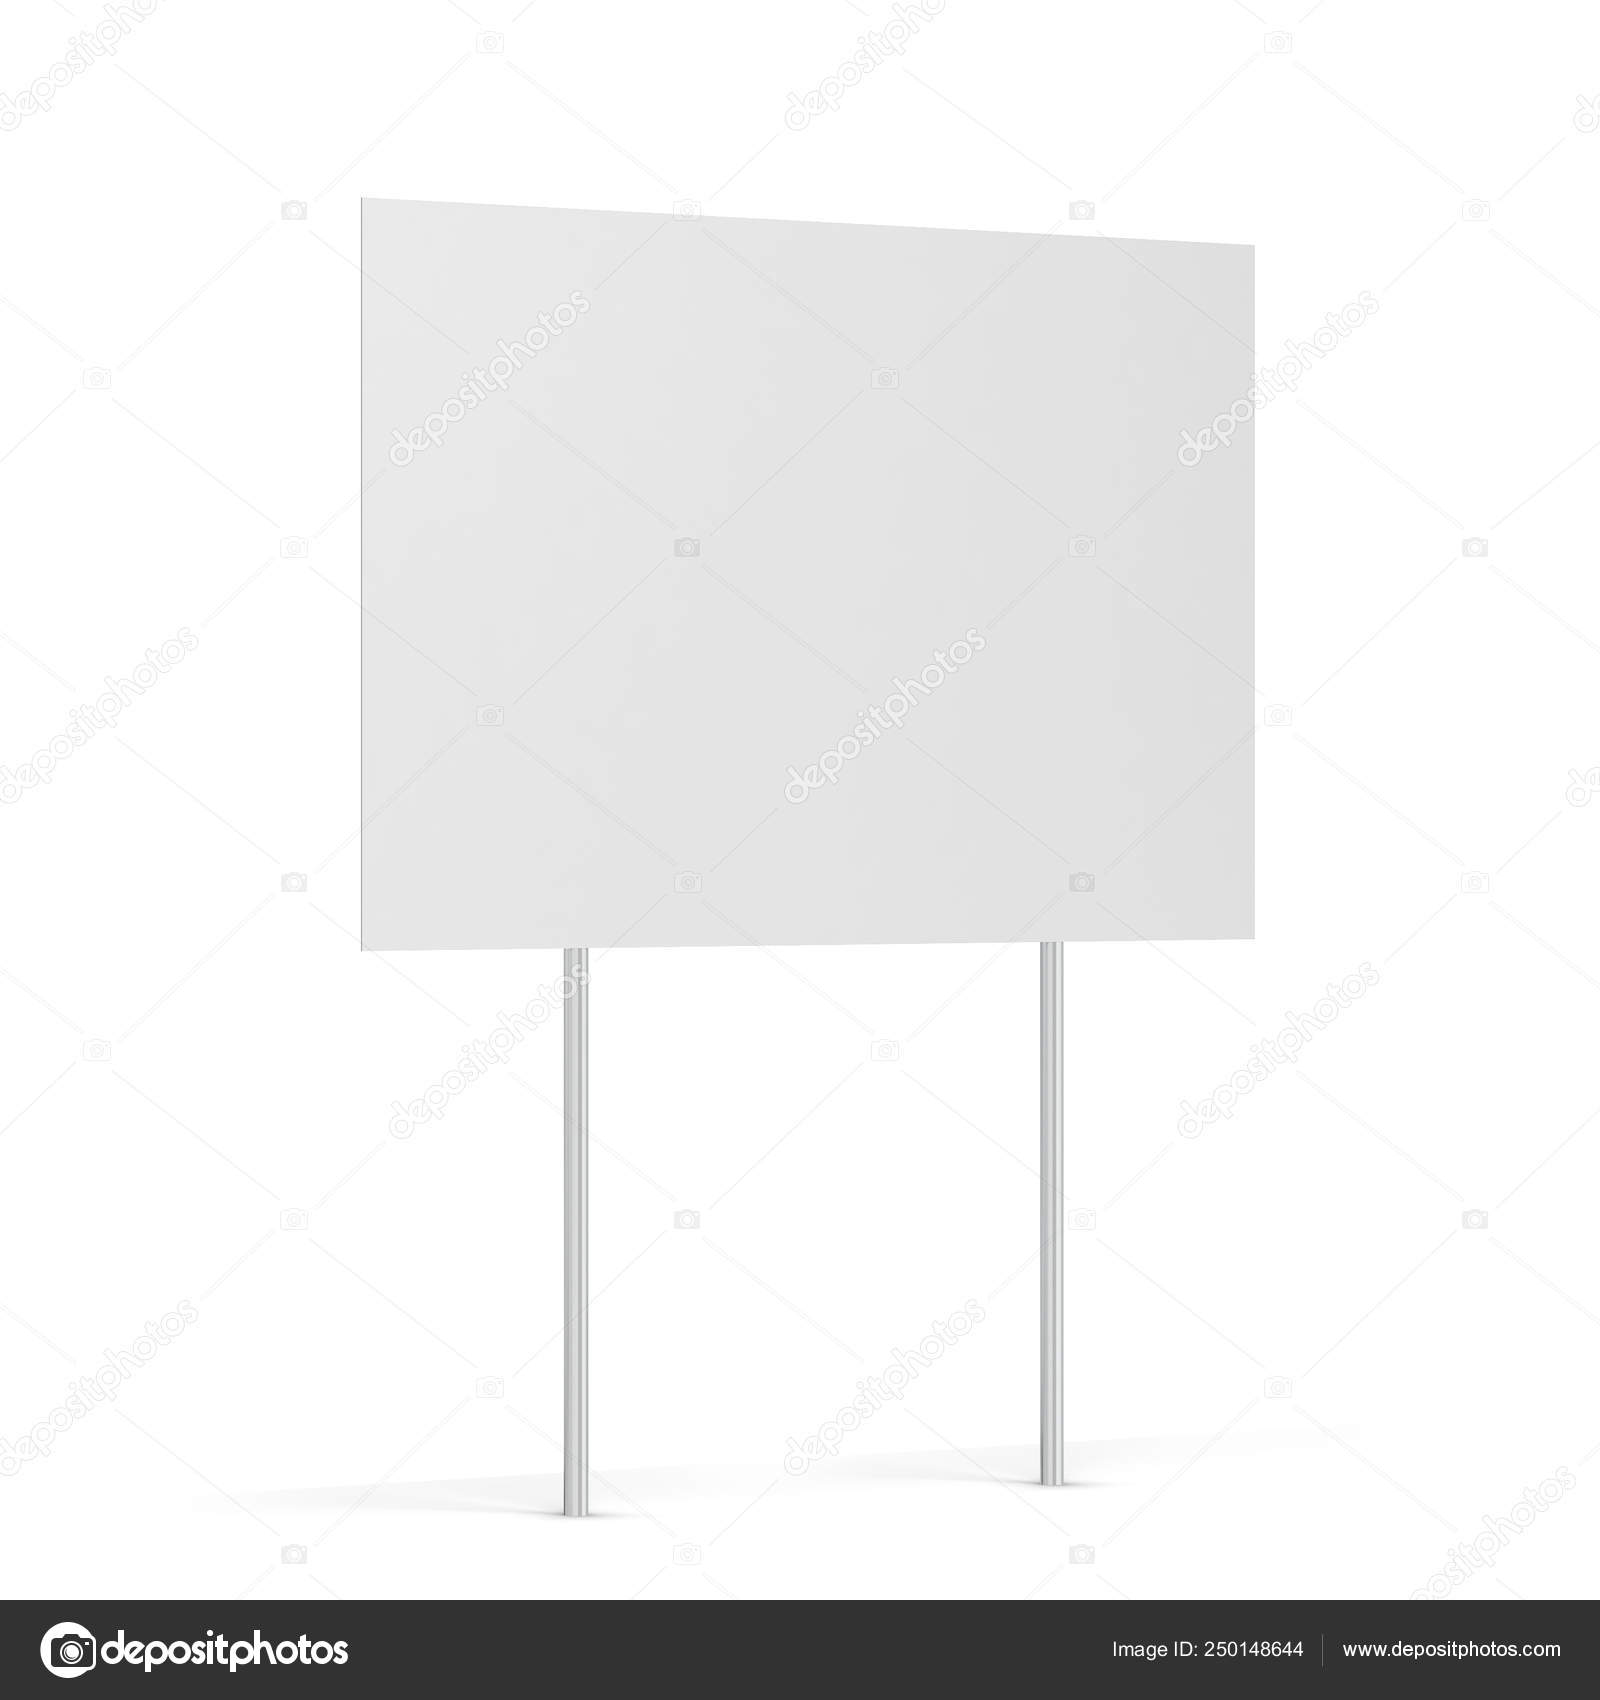 Download Blank Yard Sign Stock Photo Image By C Montego 250148644